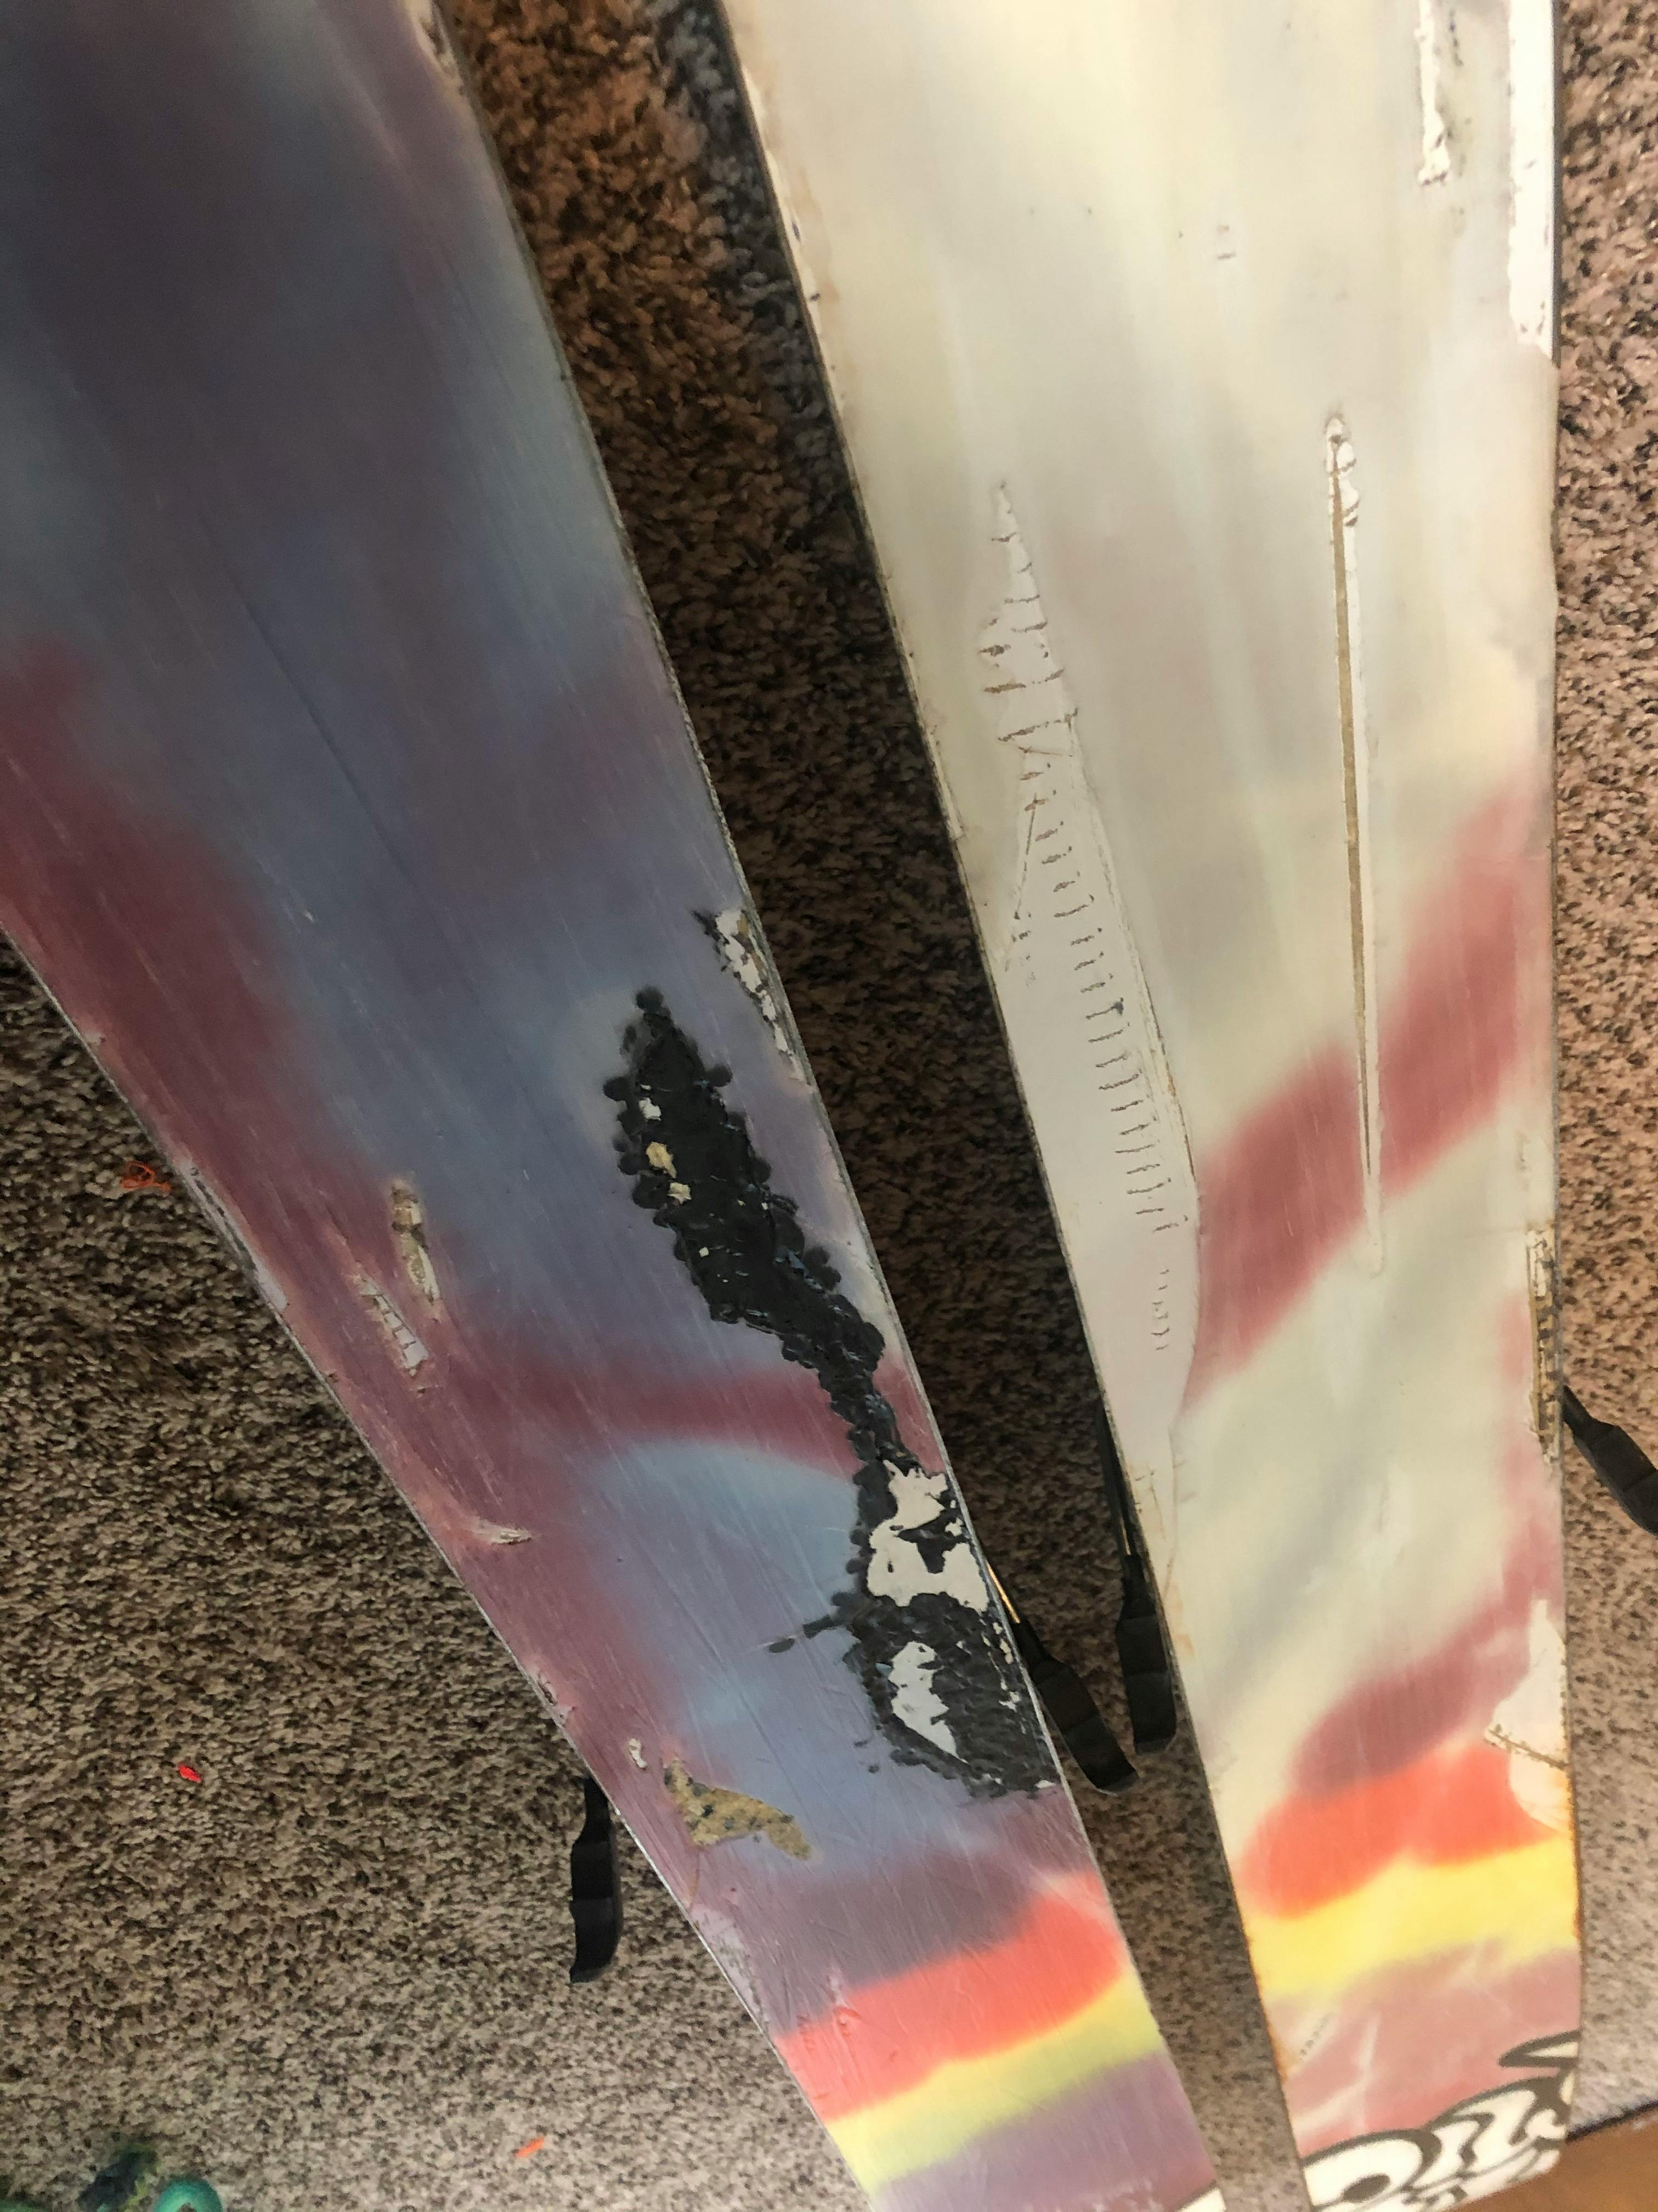 The bottom of a pair of skis - they are torn up from rocks